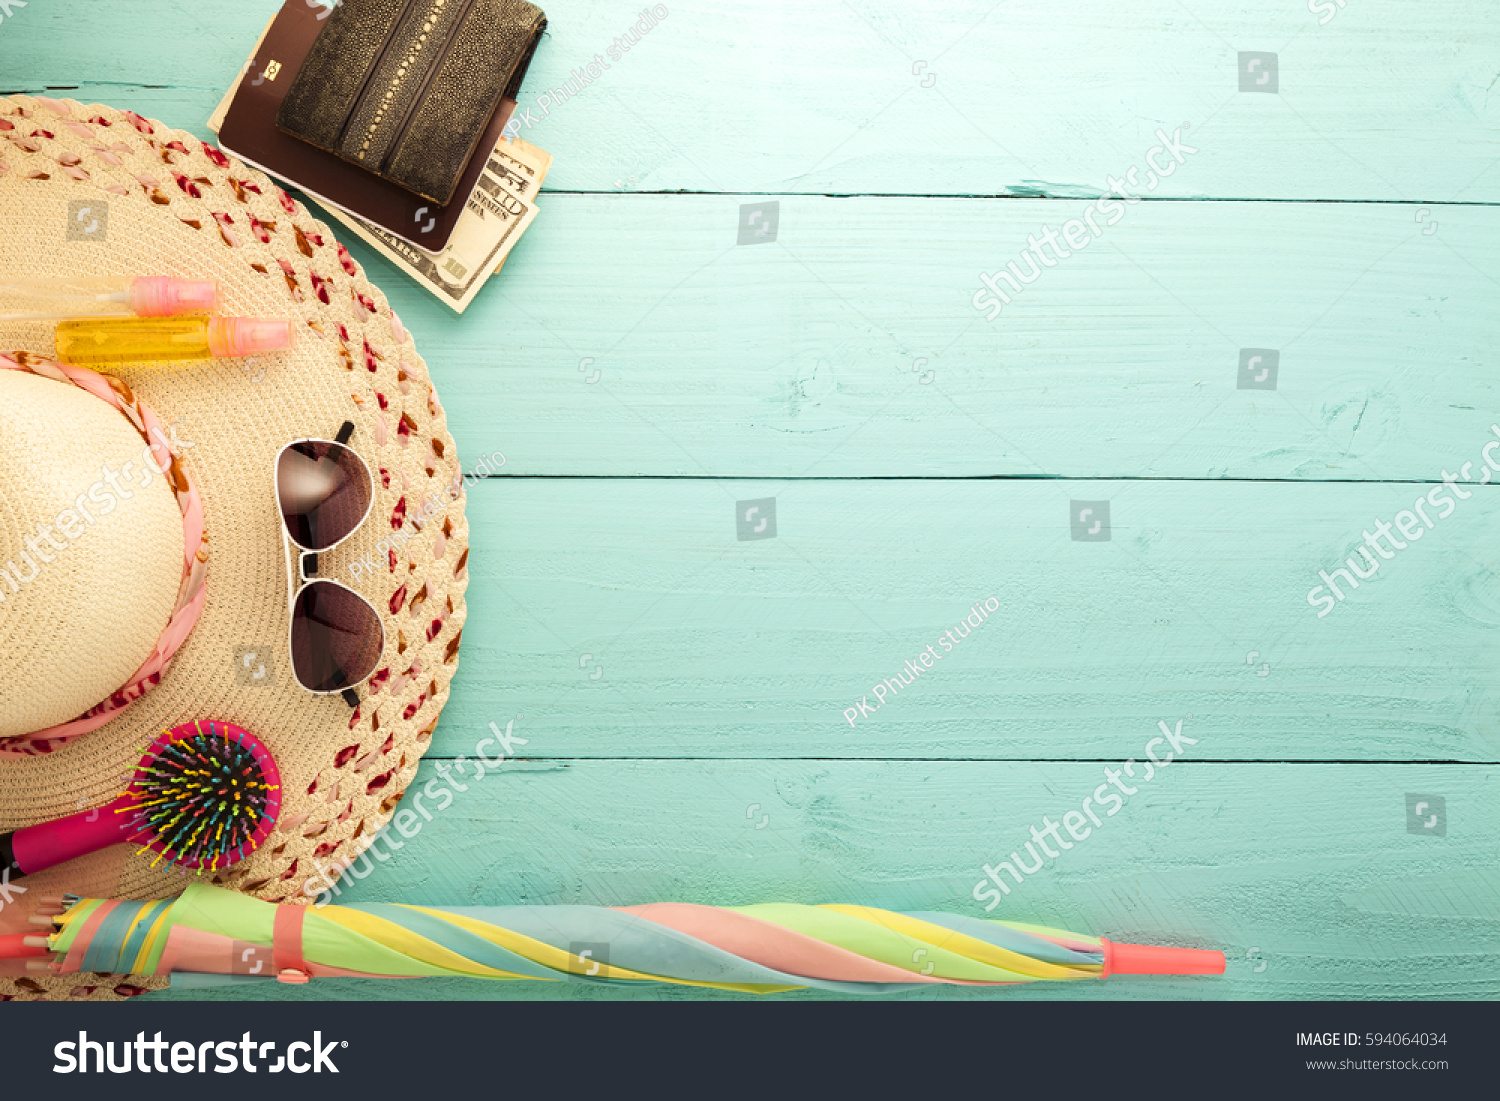 Summer background, set of summer accessories on wood background #594064034